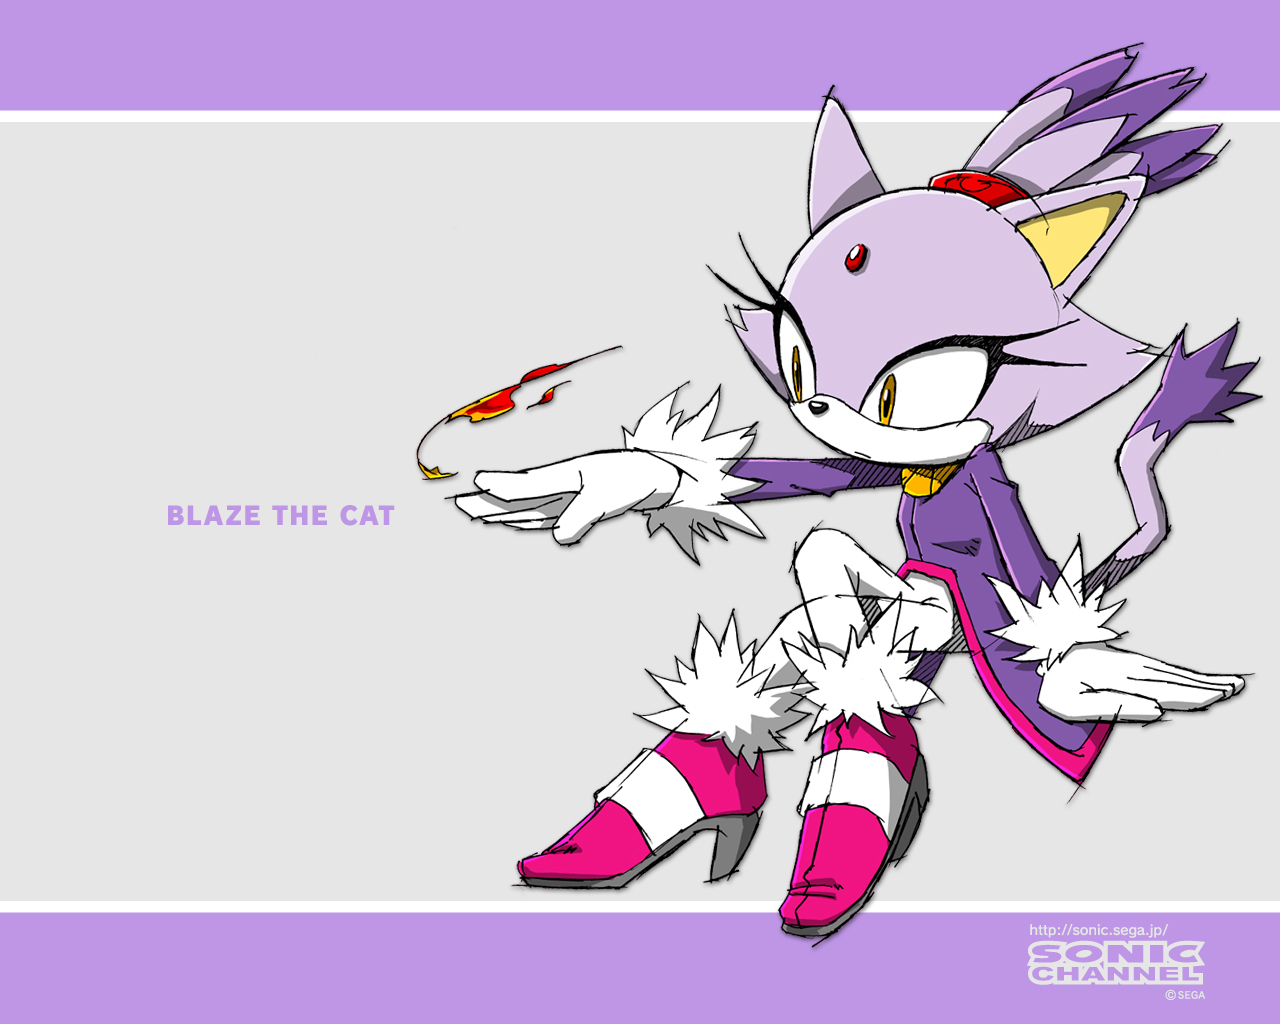 video game, blaze the cat, sonic channel, sonic the hedgehog